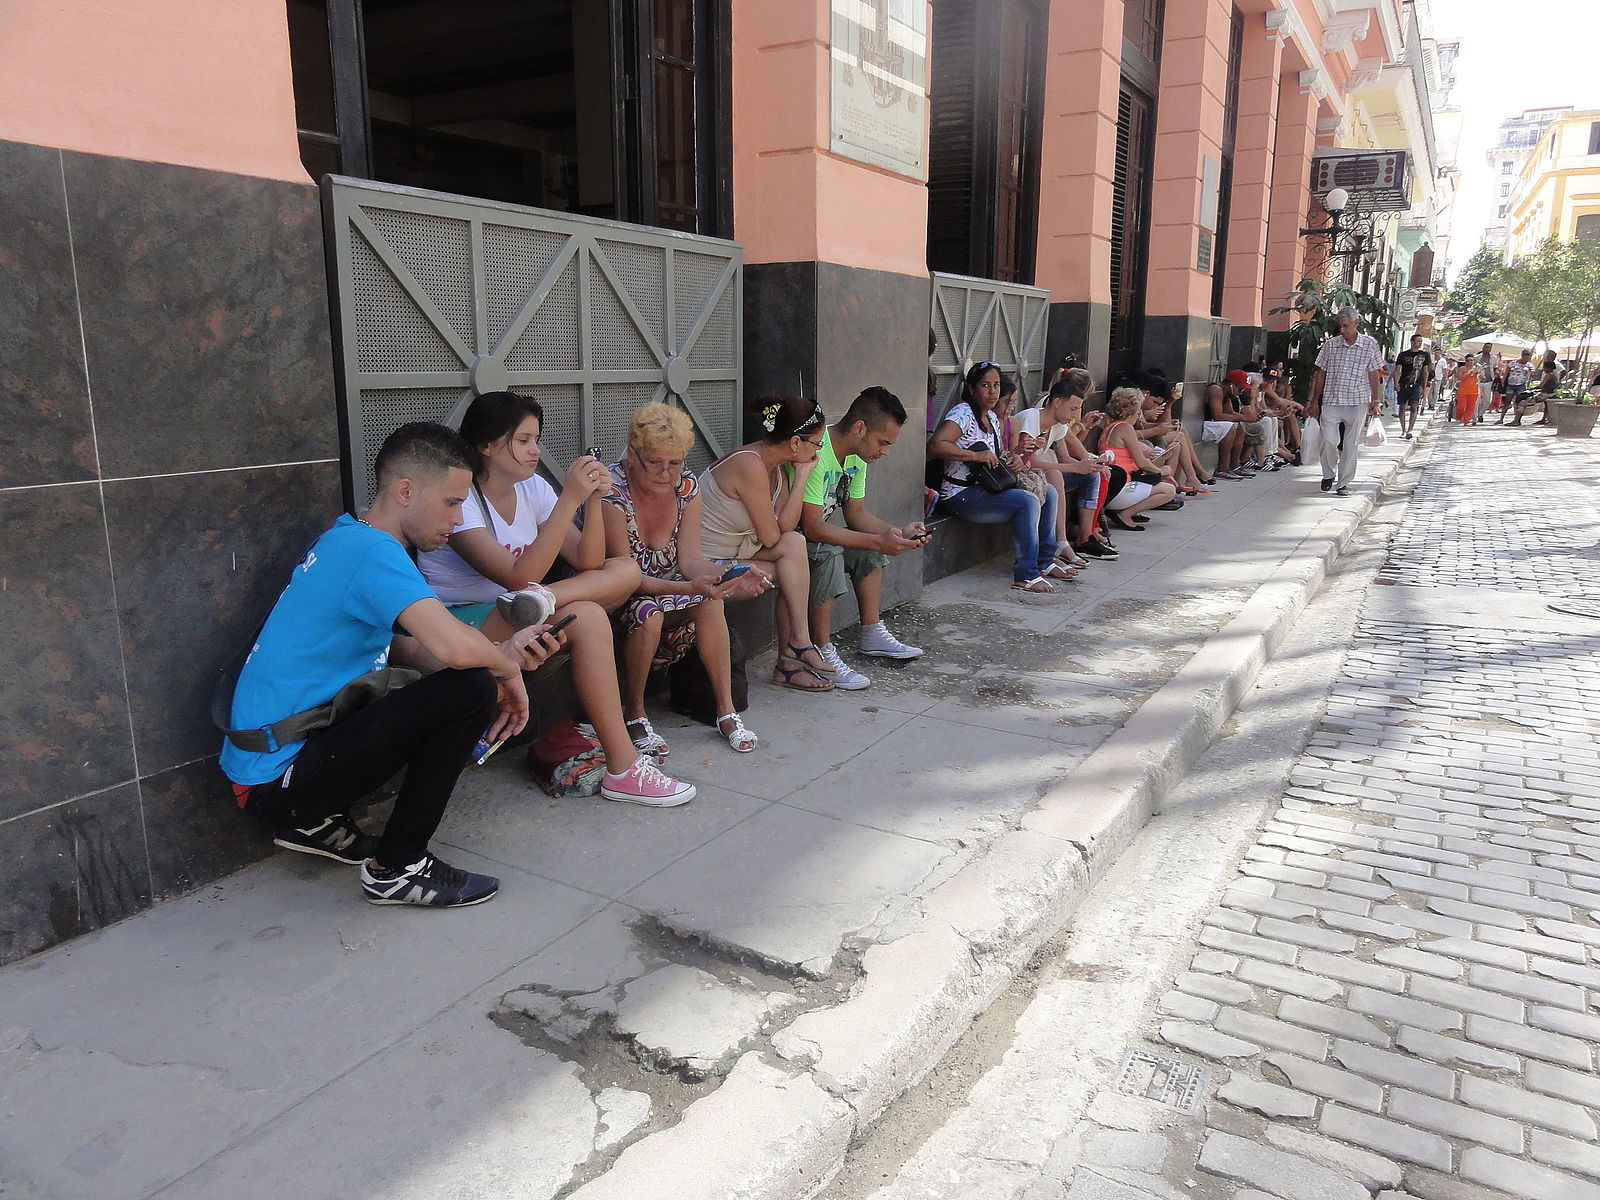 Online, In Line: Cuba’s Internet Liberalisation Only a Small Reason to Celebrate